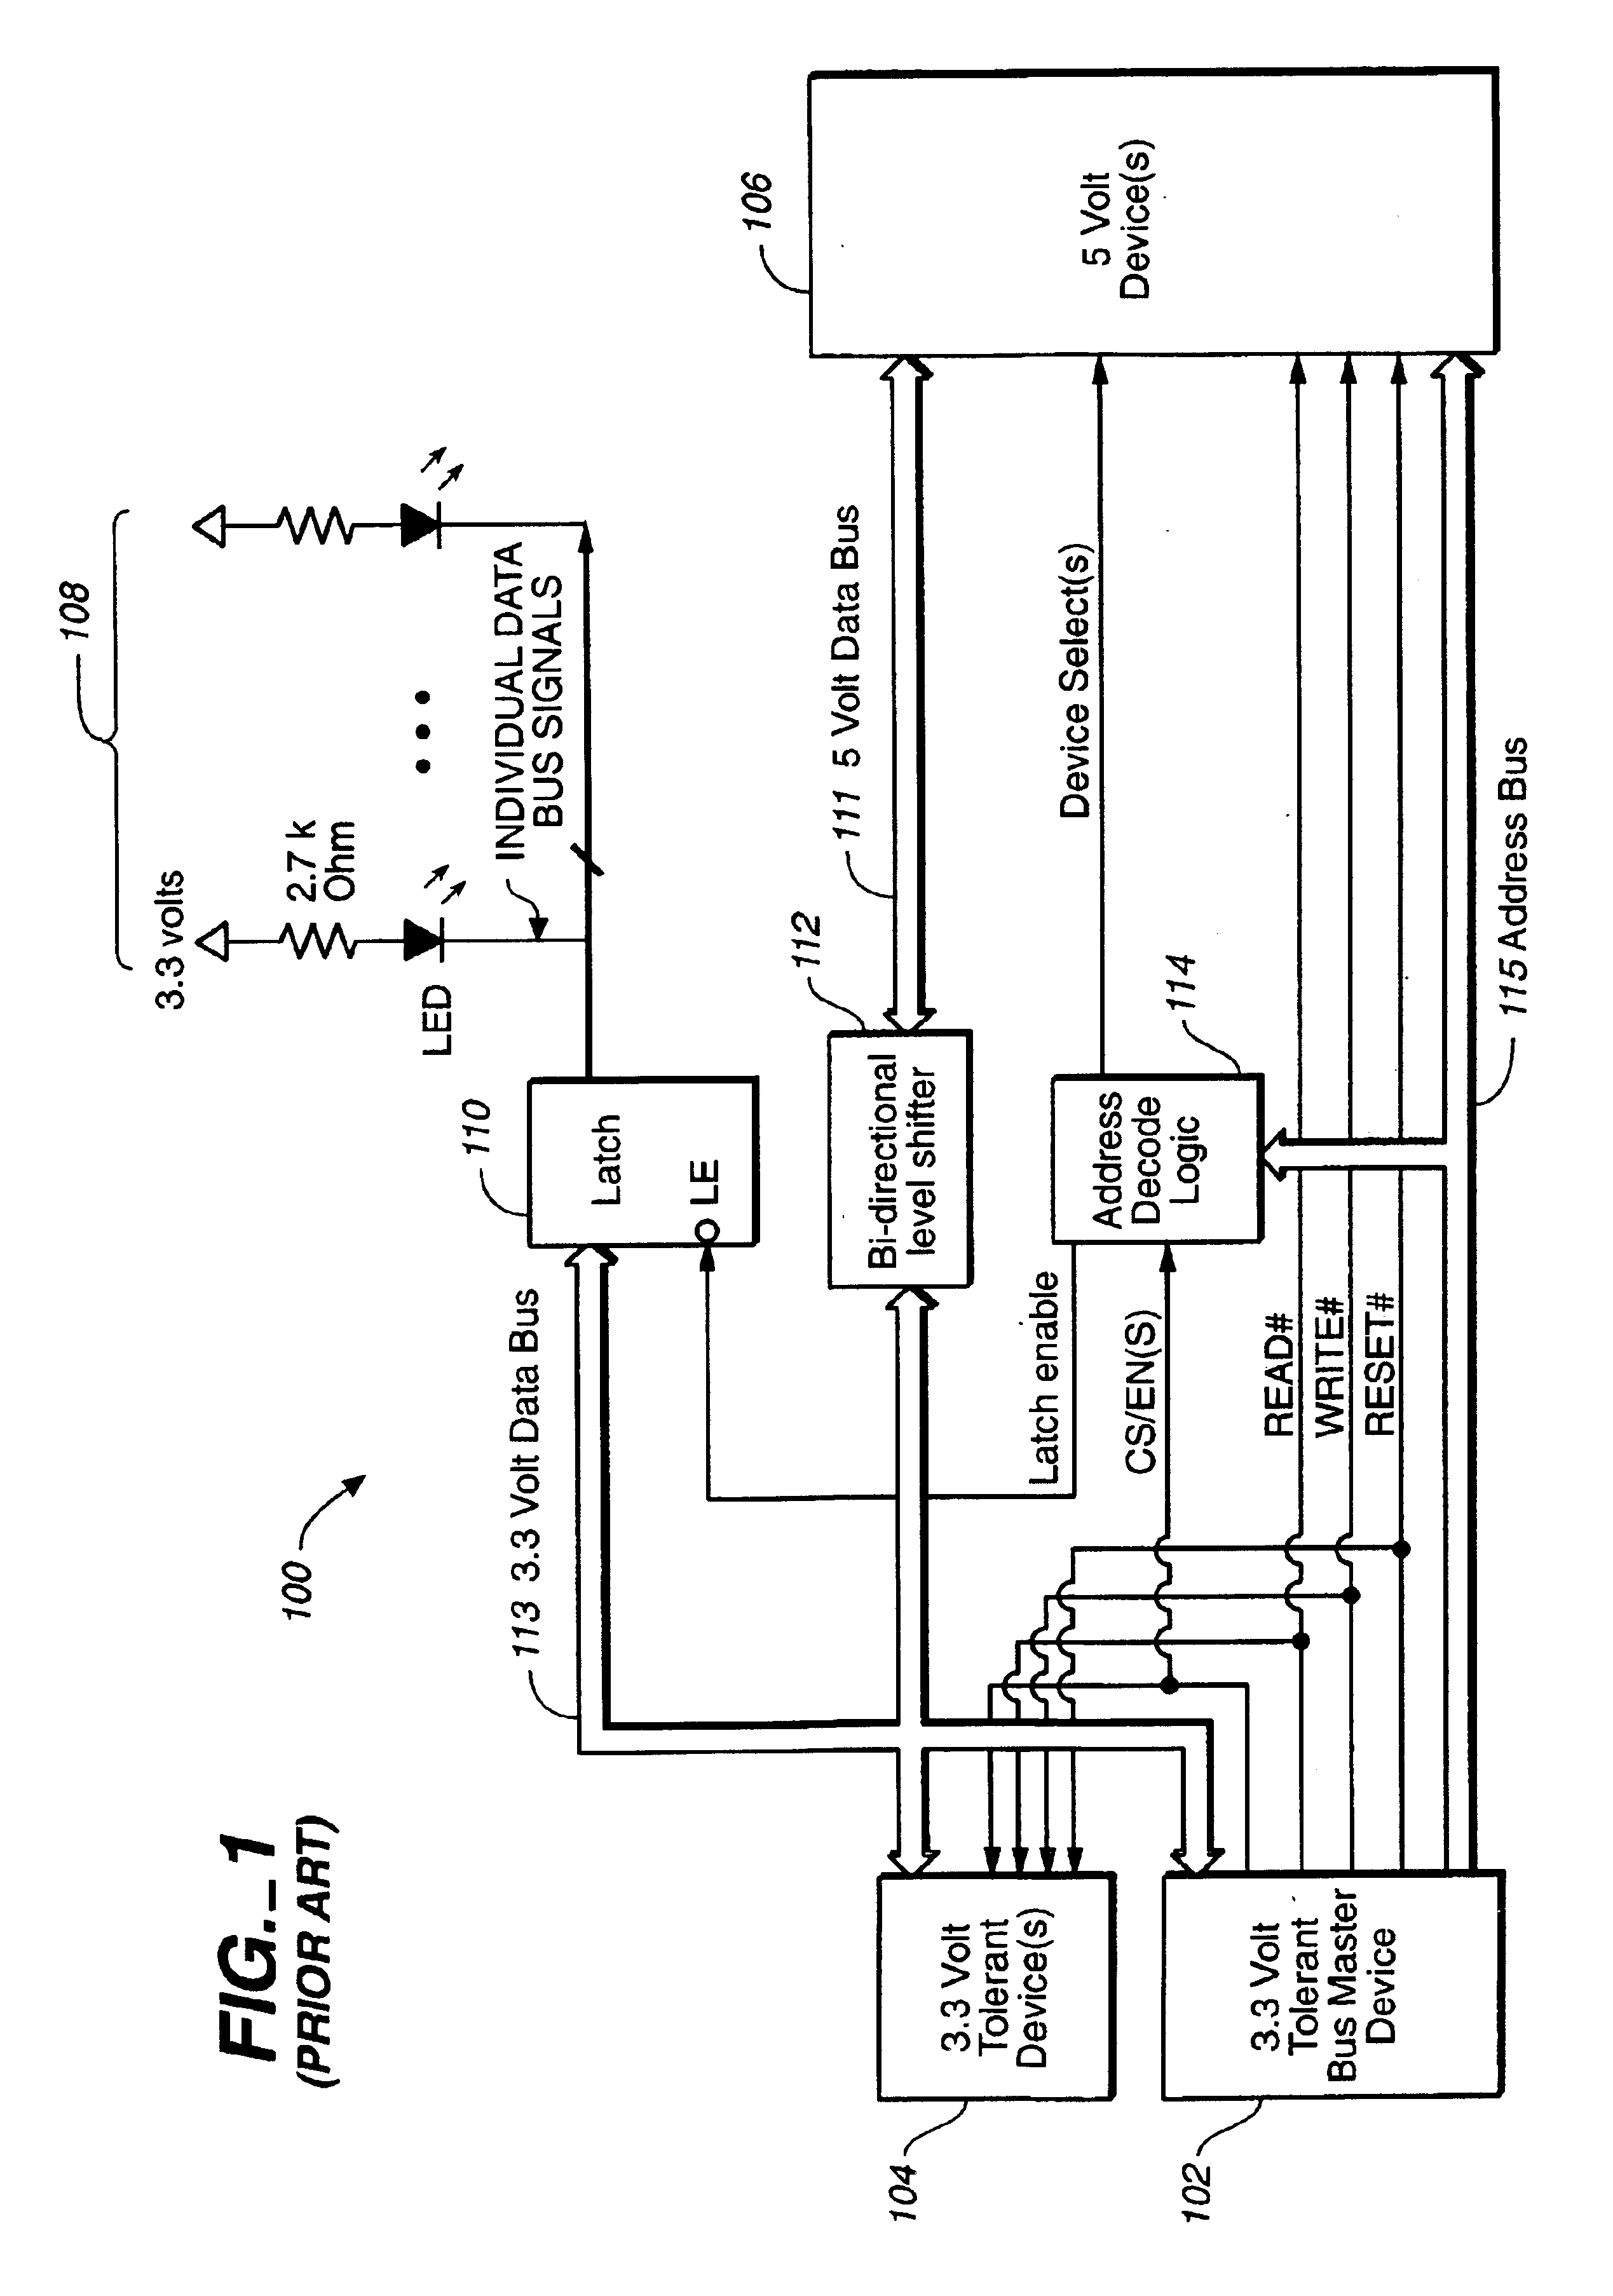 Method and apparatus for transferring data between data buses